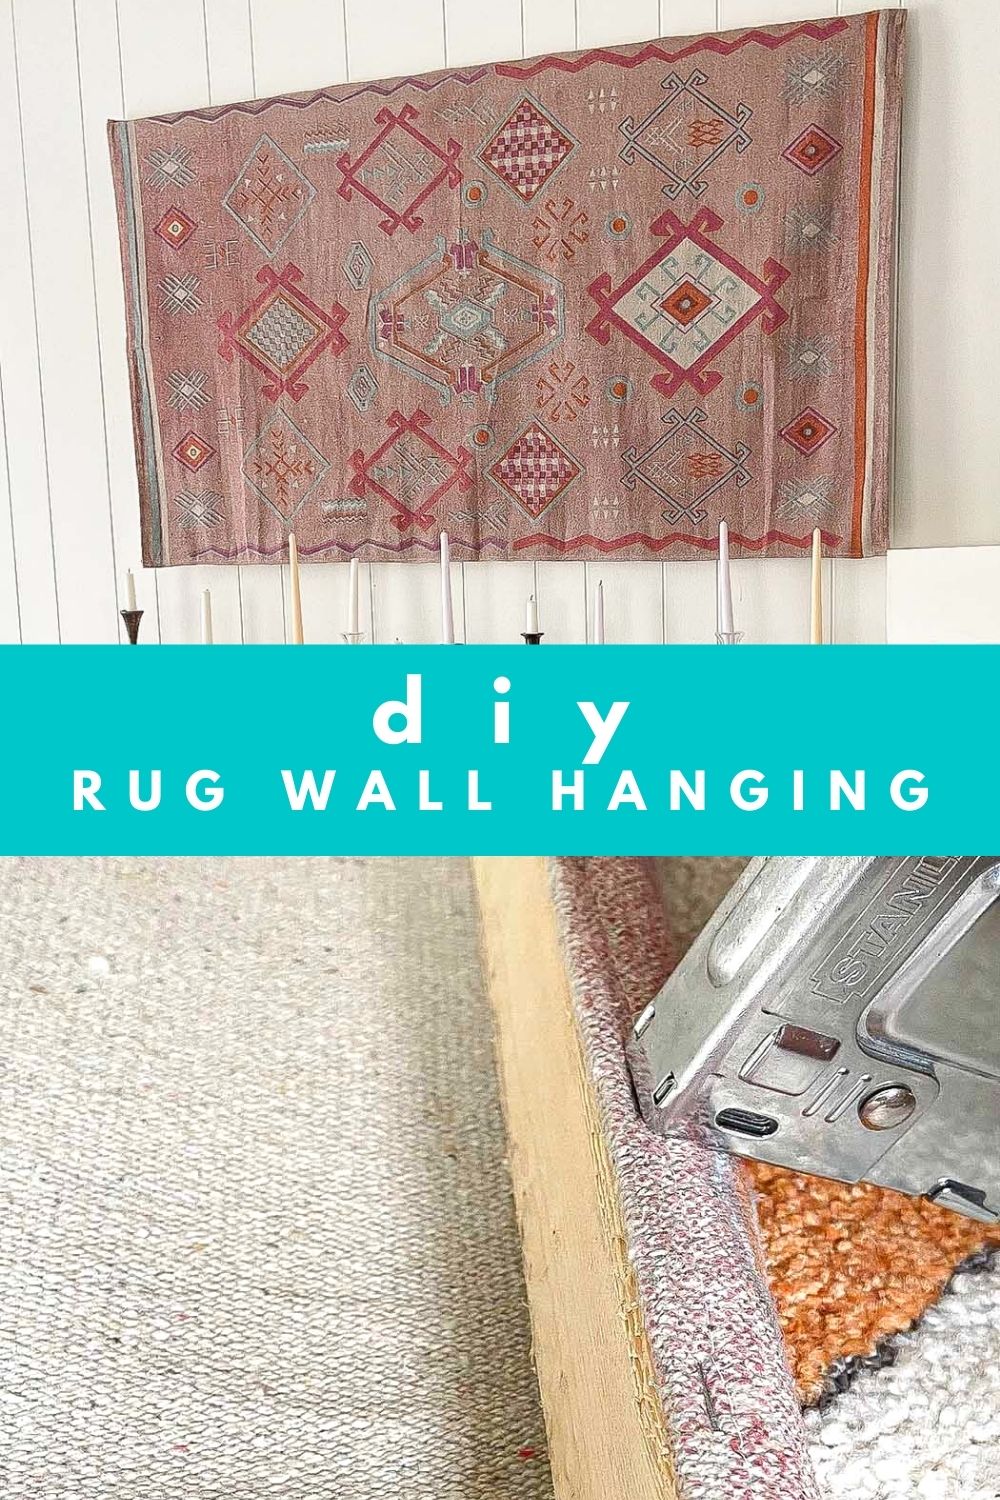 How to Hang a rug on a wall